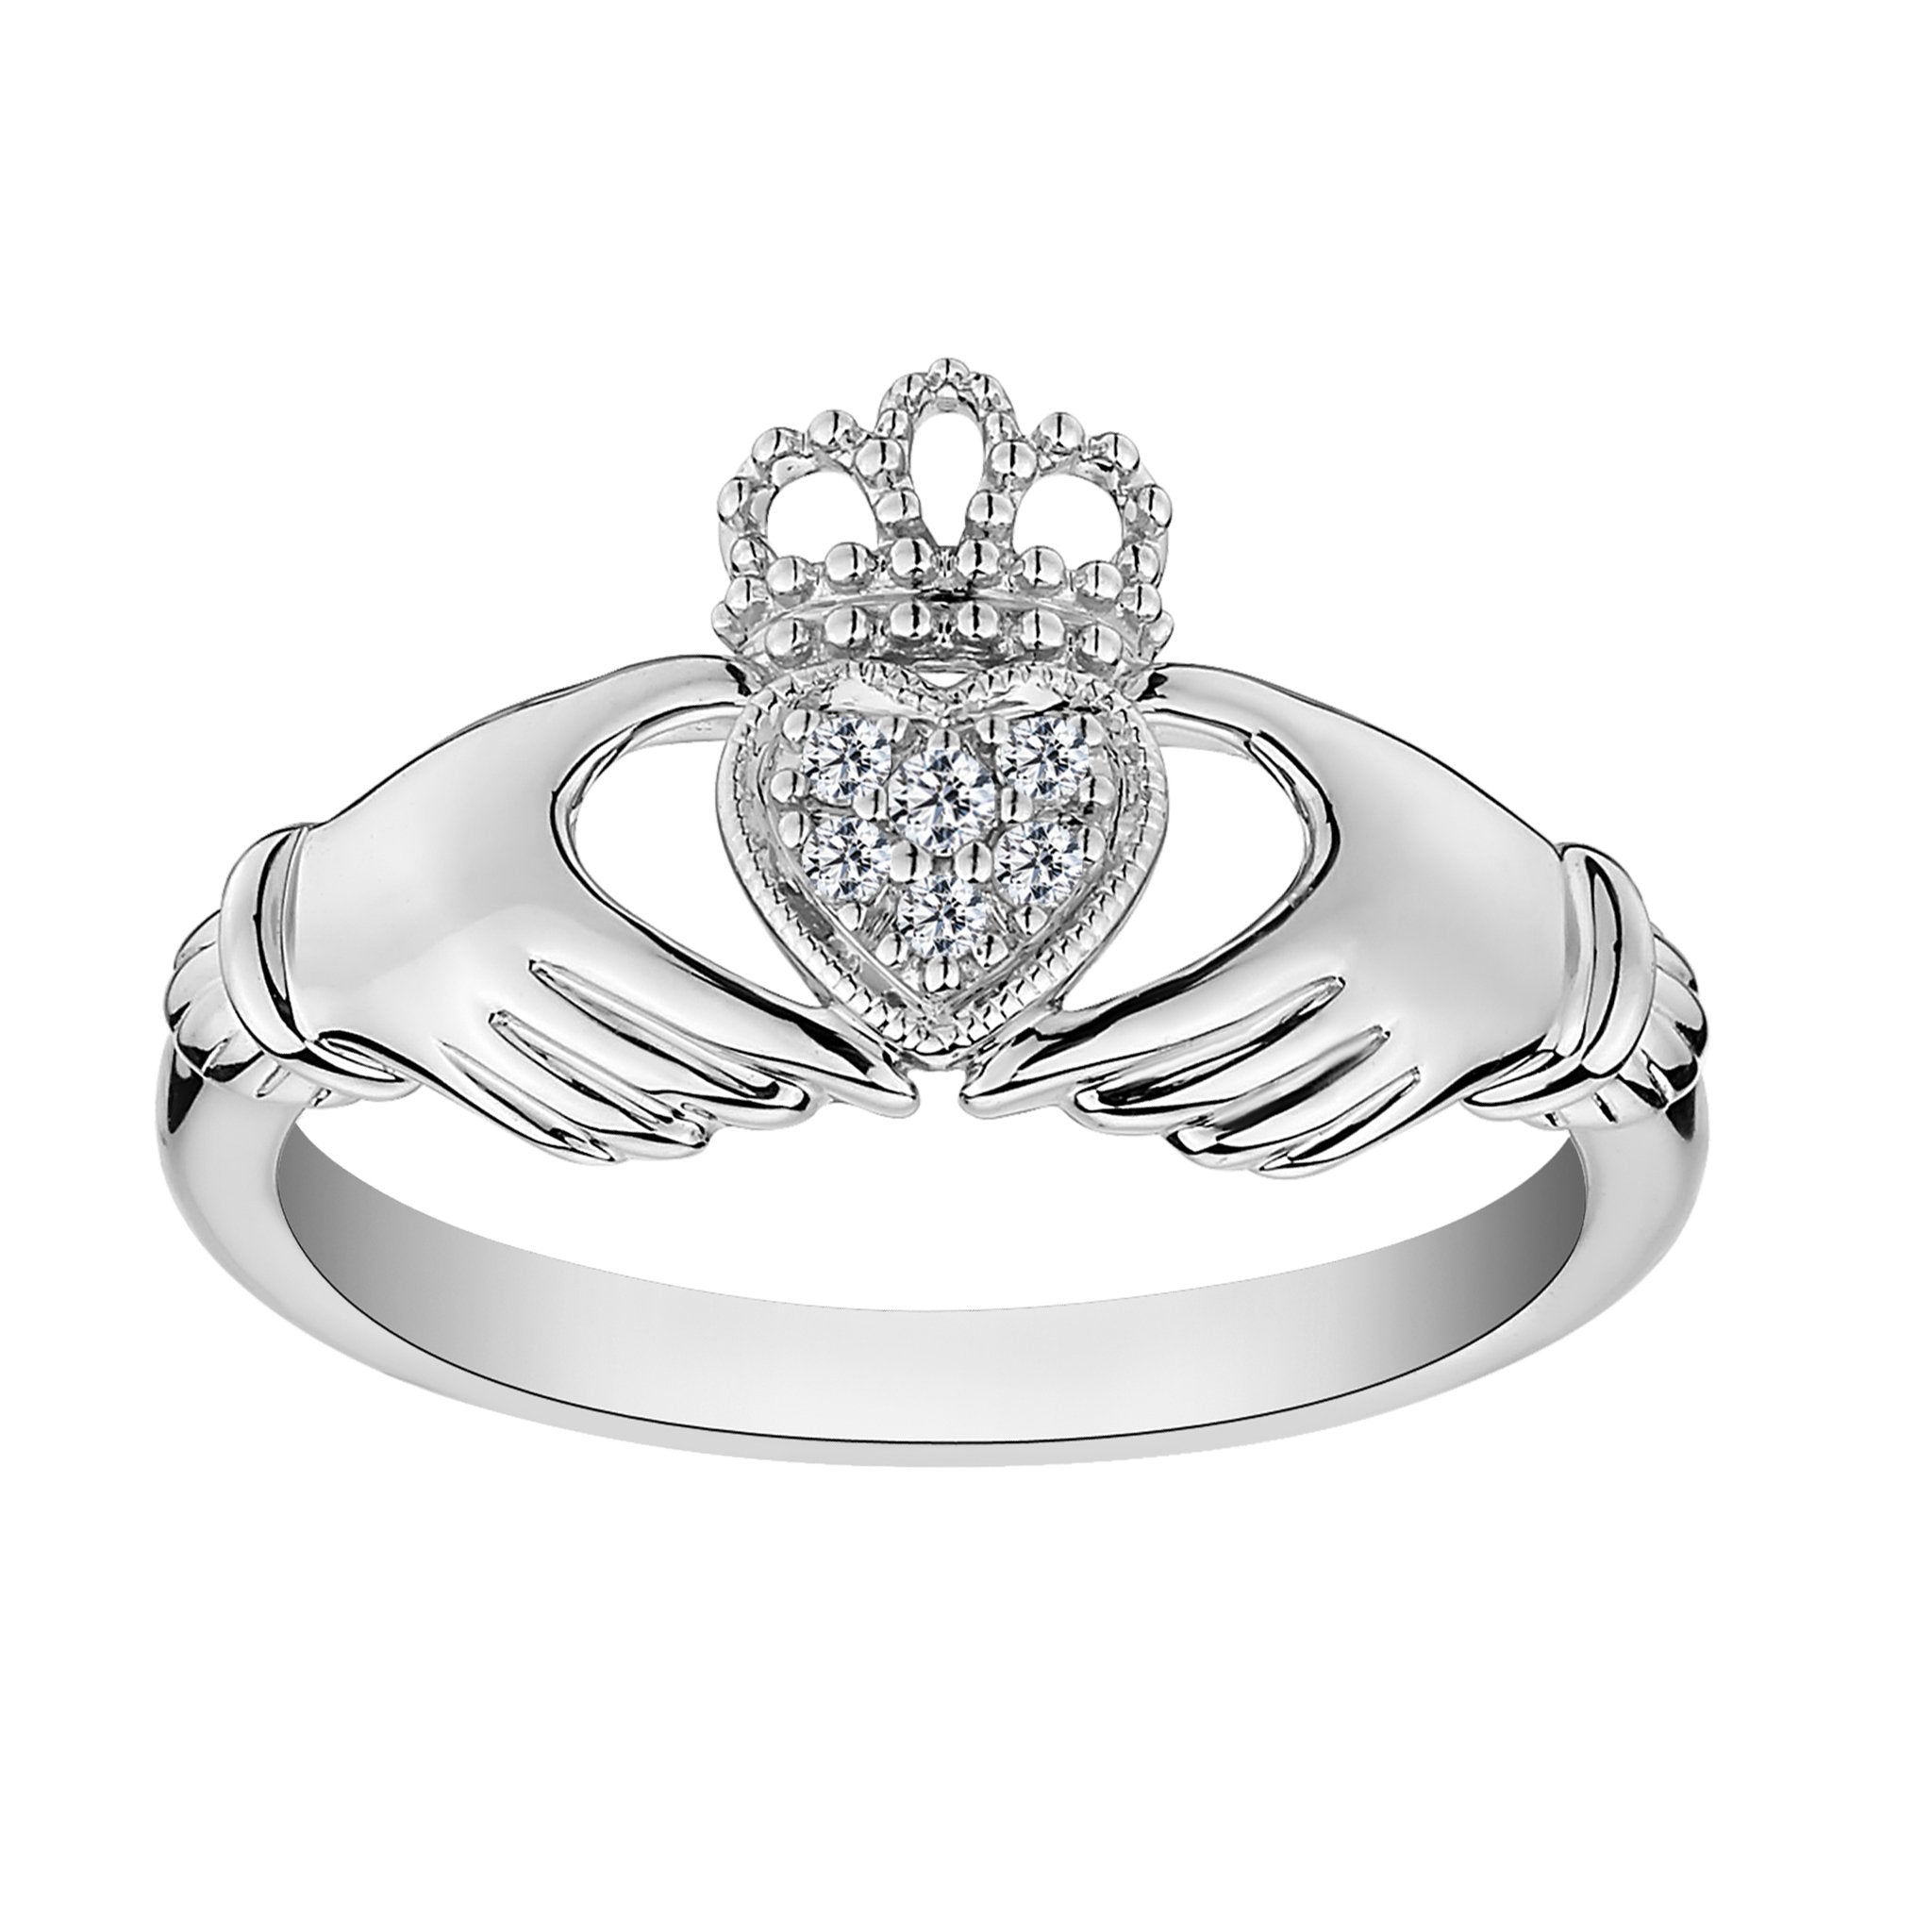 .05 CARAT DIAMOND "CLADDAGH" RING, 10kt WHITE GOLD. Fashion Rings - Griffin Jewellery Designs